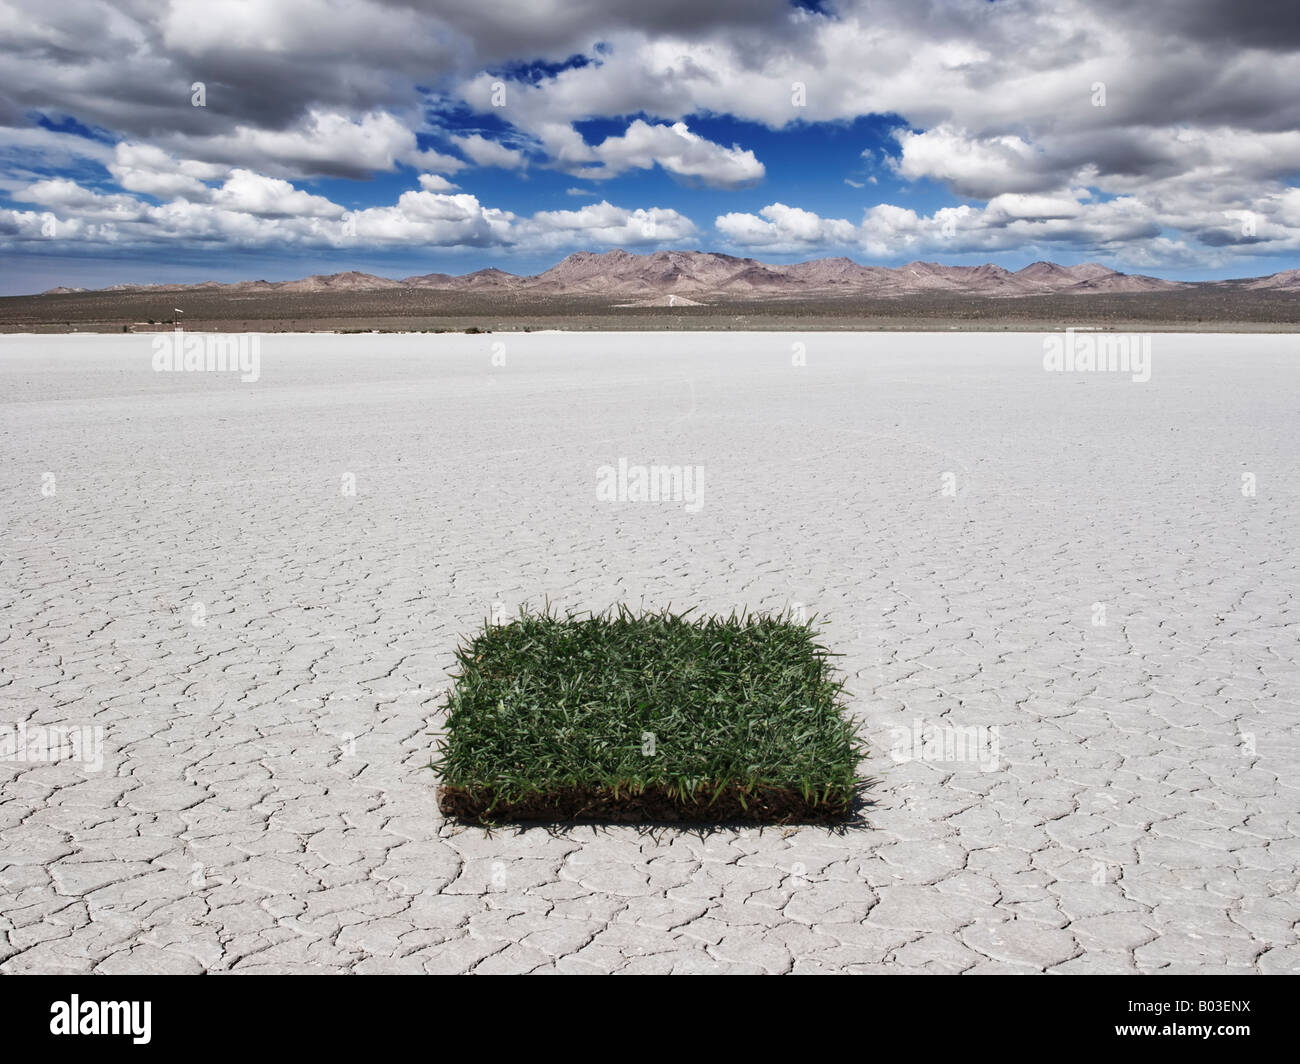 Patch of grass in the desert Stock Photo